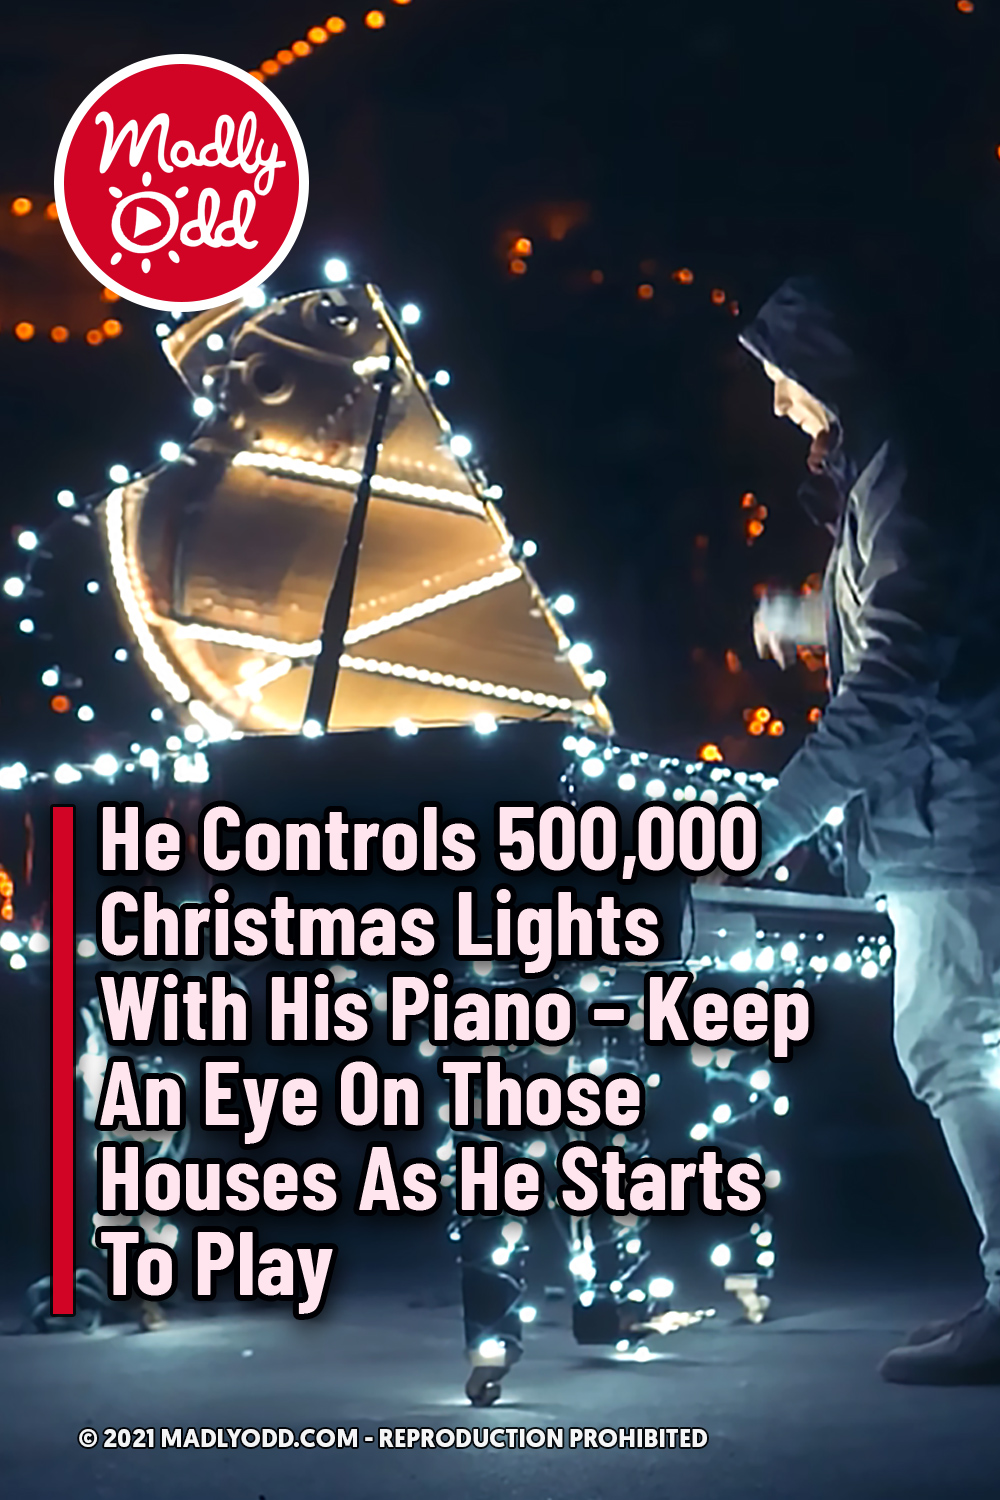 He Controls 500,000 Christmas Lights With His Piano - Keep An Eye On Those Houses As He Starts To Play